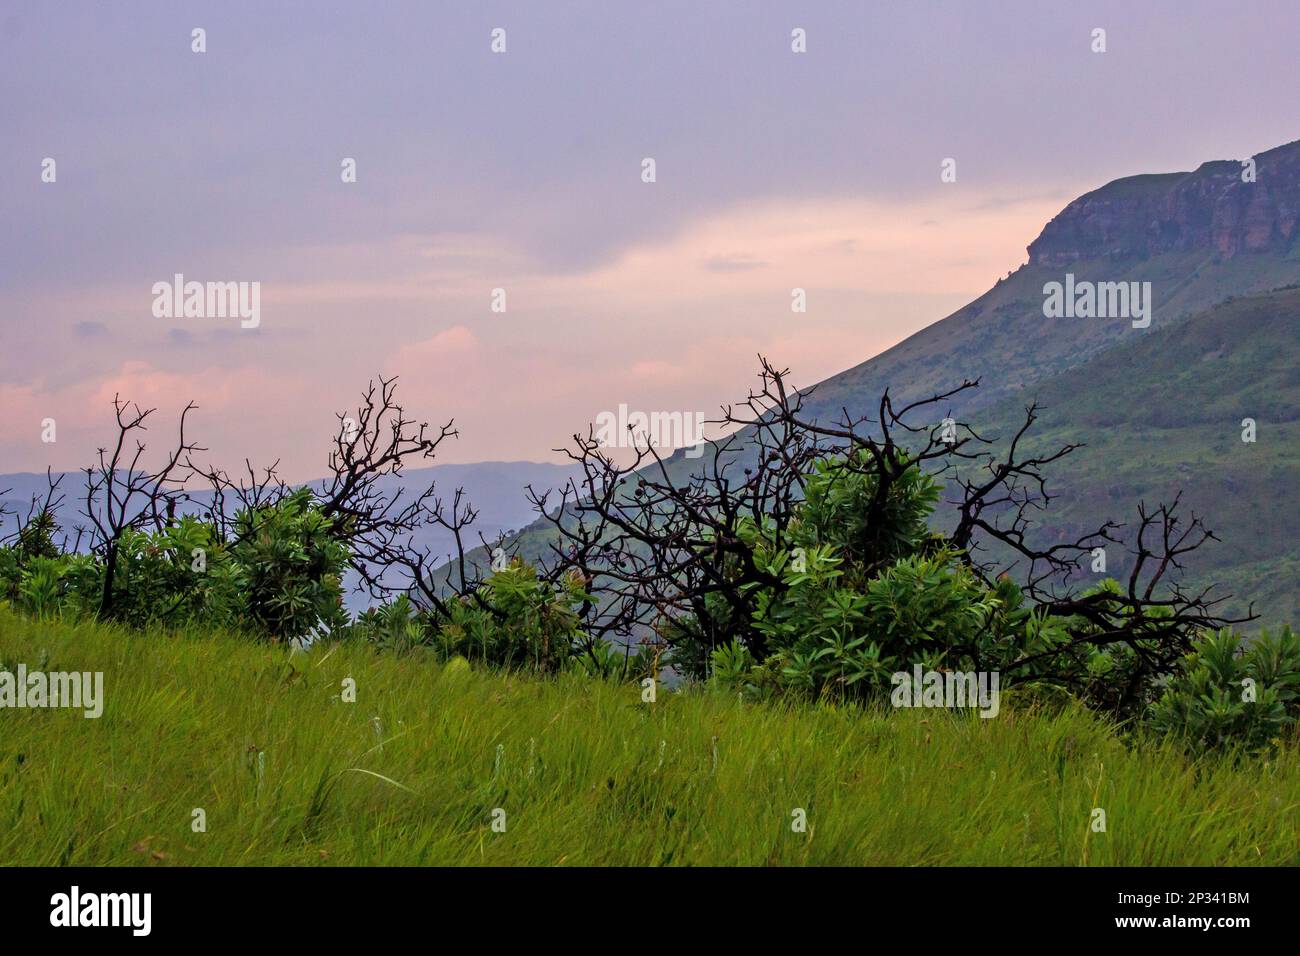 Sunset in the Drakensberg Mountains, with the burnt-out branches and new growth of a common protea, Protea caffra, in the foreground Stock Photo